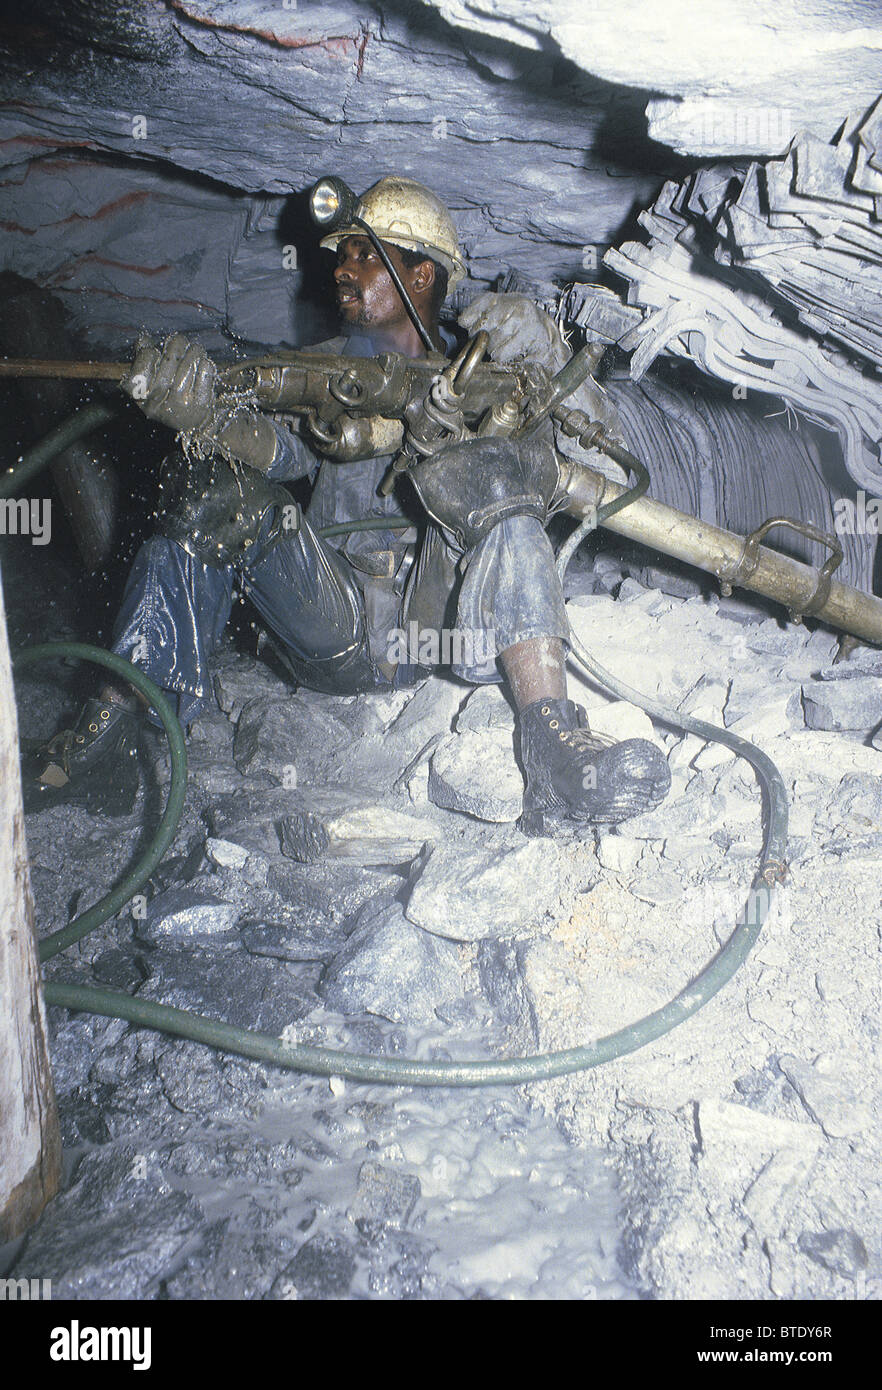 Drilling in an underground gold mine showing high pressure hoses and cramped working conditions. Stock Photo